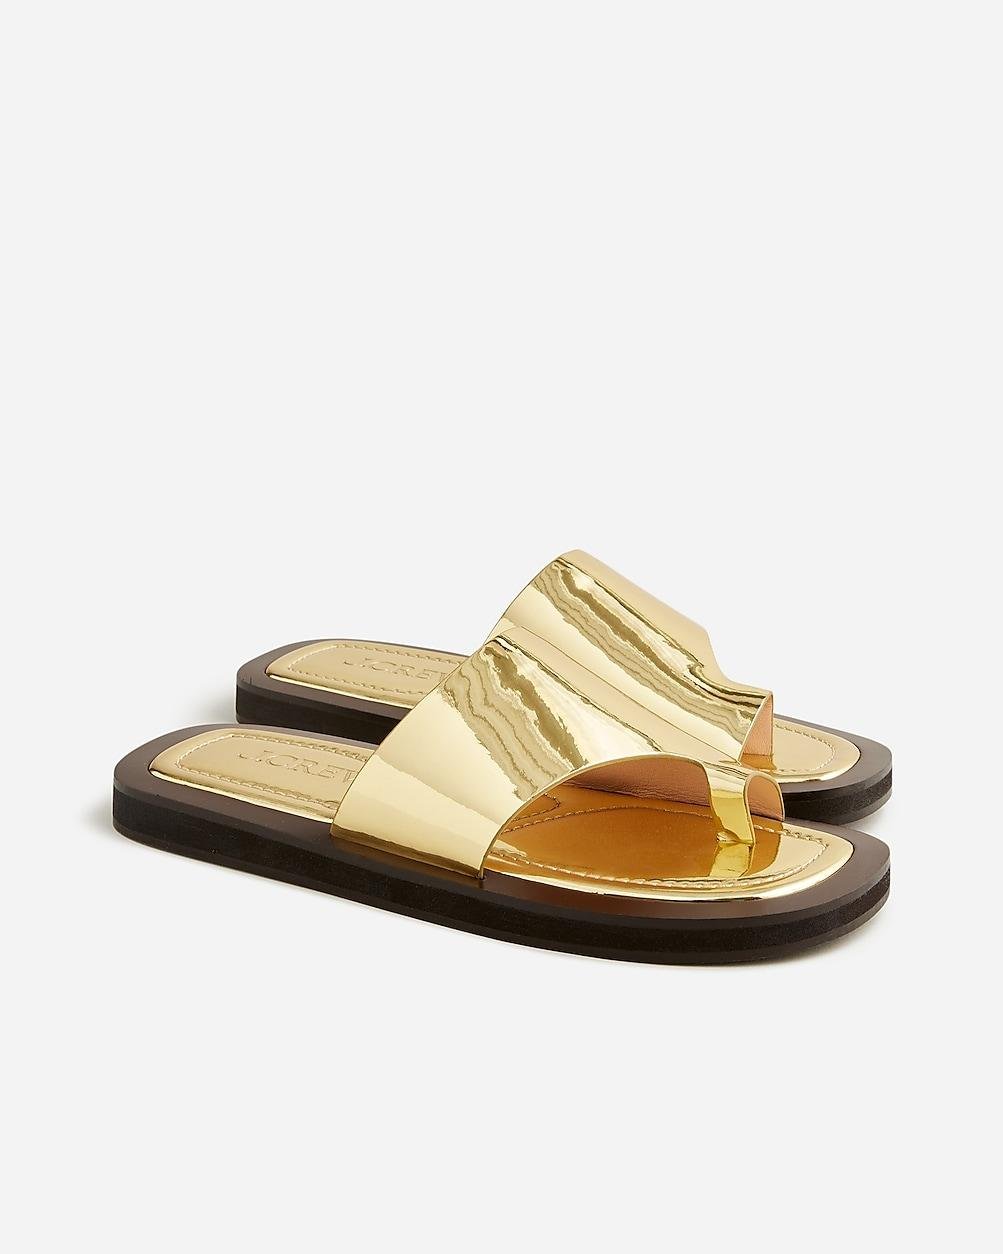 Toe-ring slide sandals in metallic leather by J.CREW